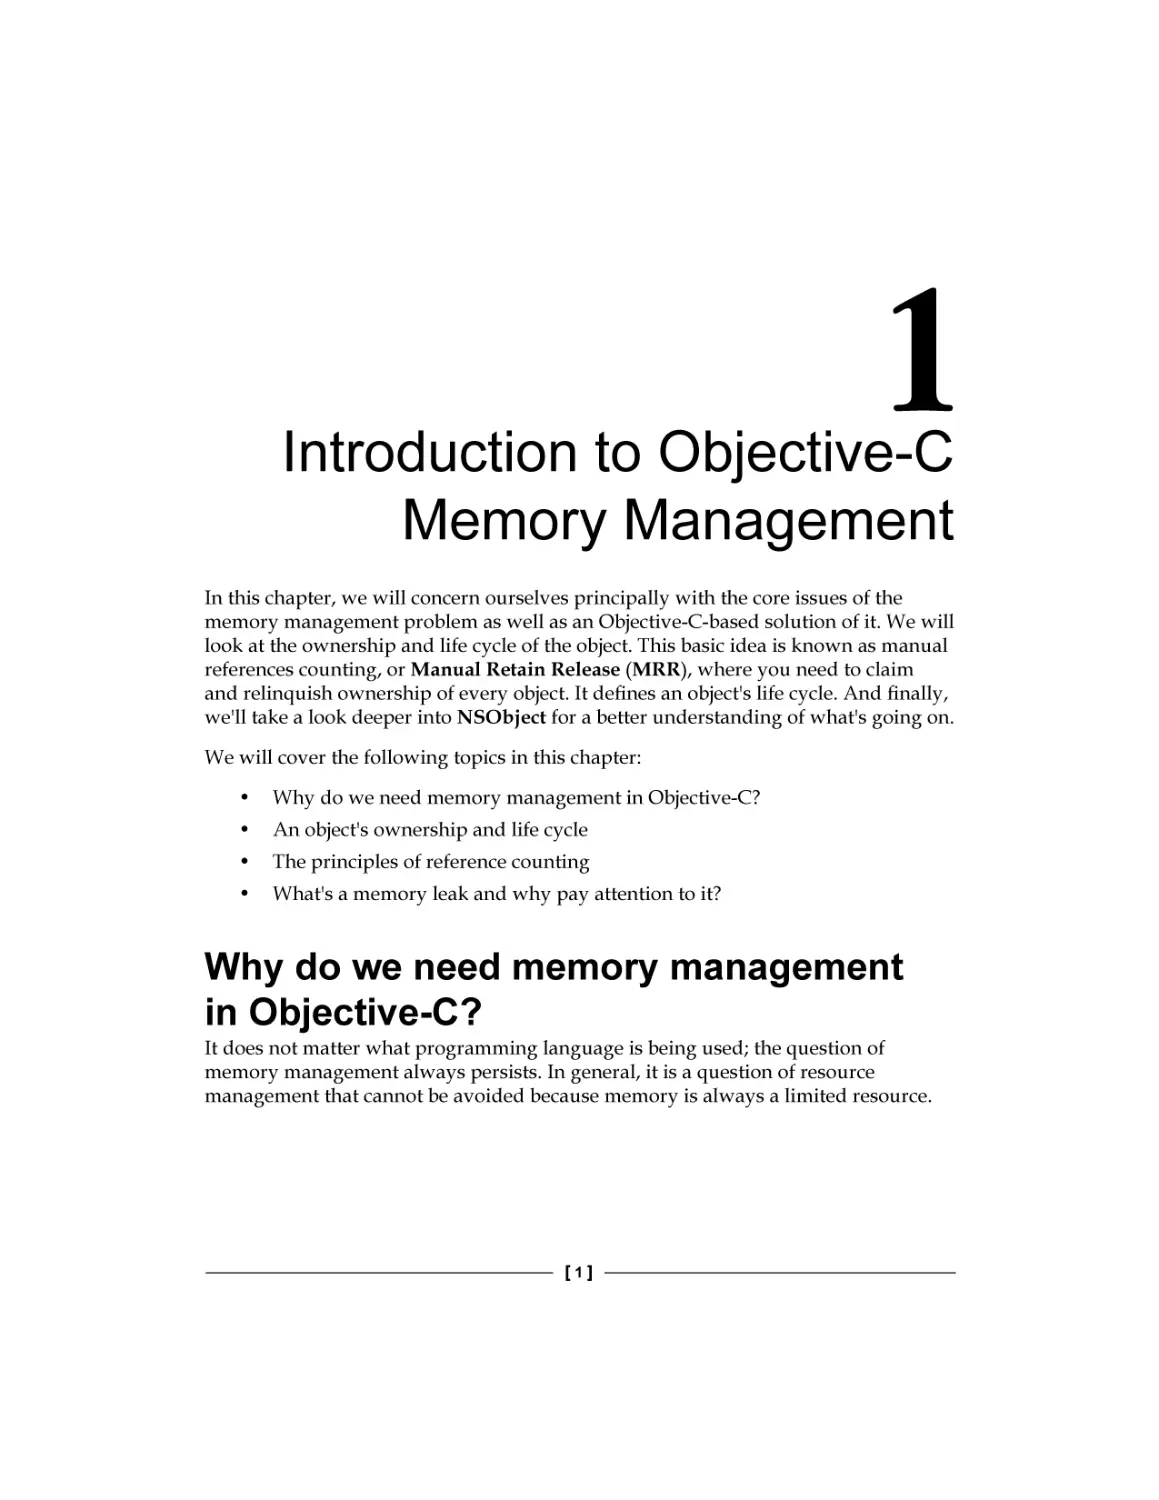 Chapter 1
Why do we need memory management in Objective-C?